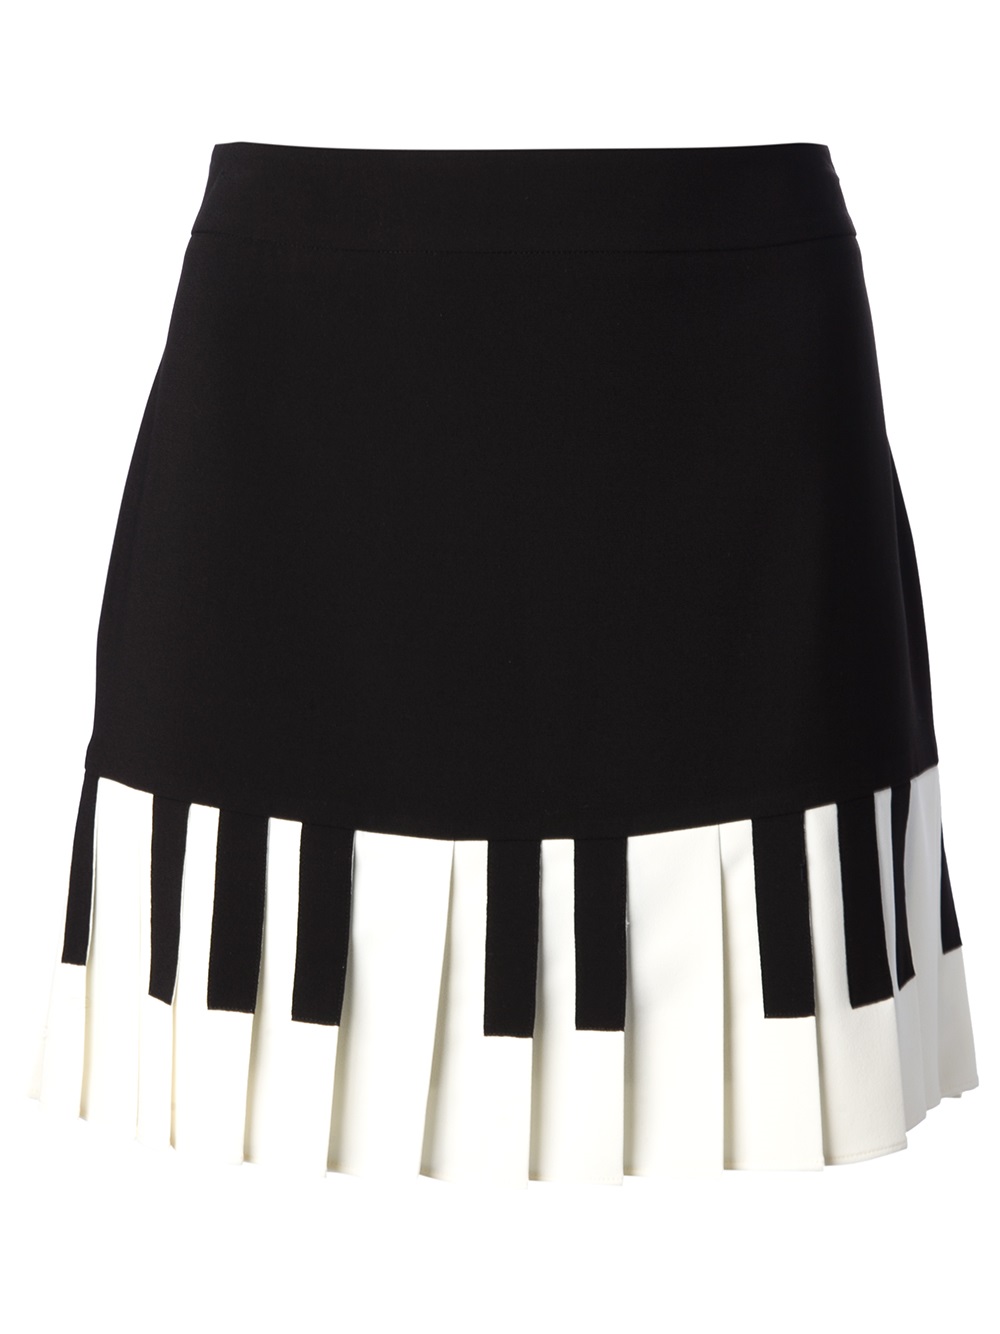 Boutique Moschino Pleated Piano Key Skirt in Black | Lyst